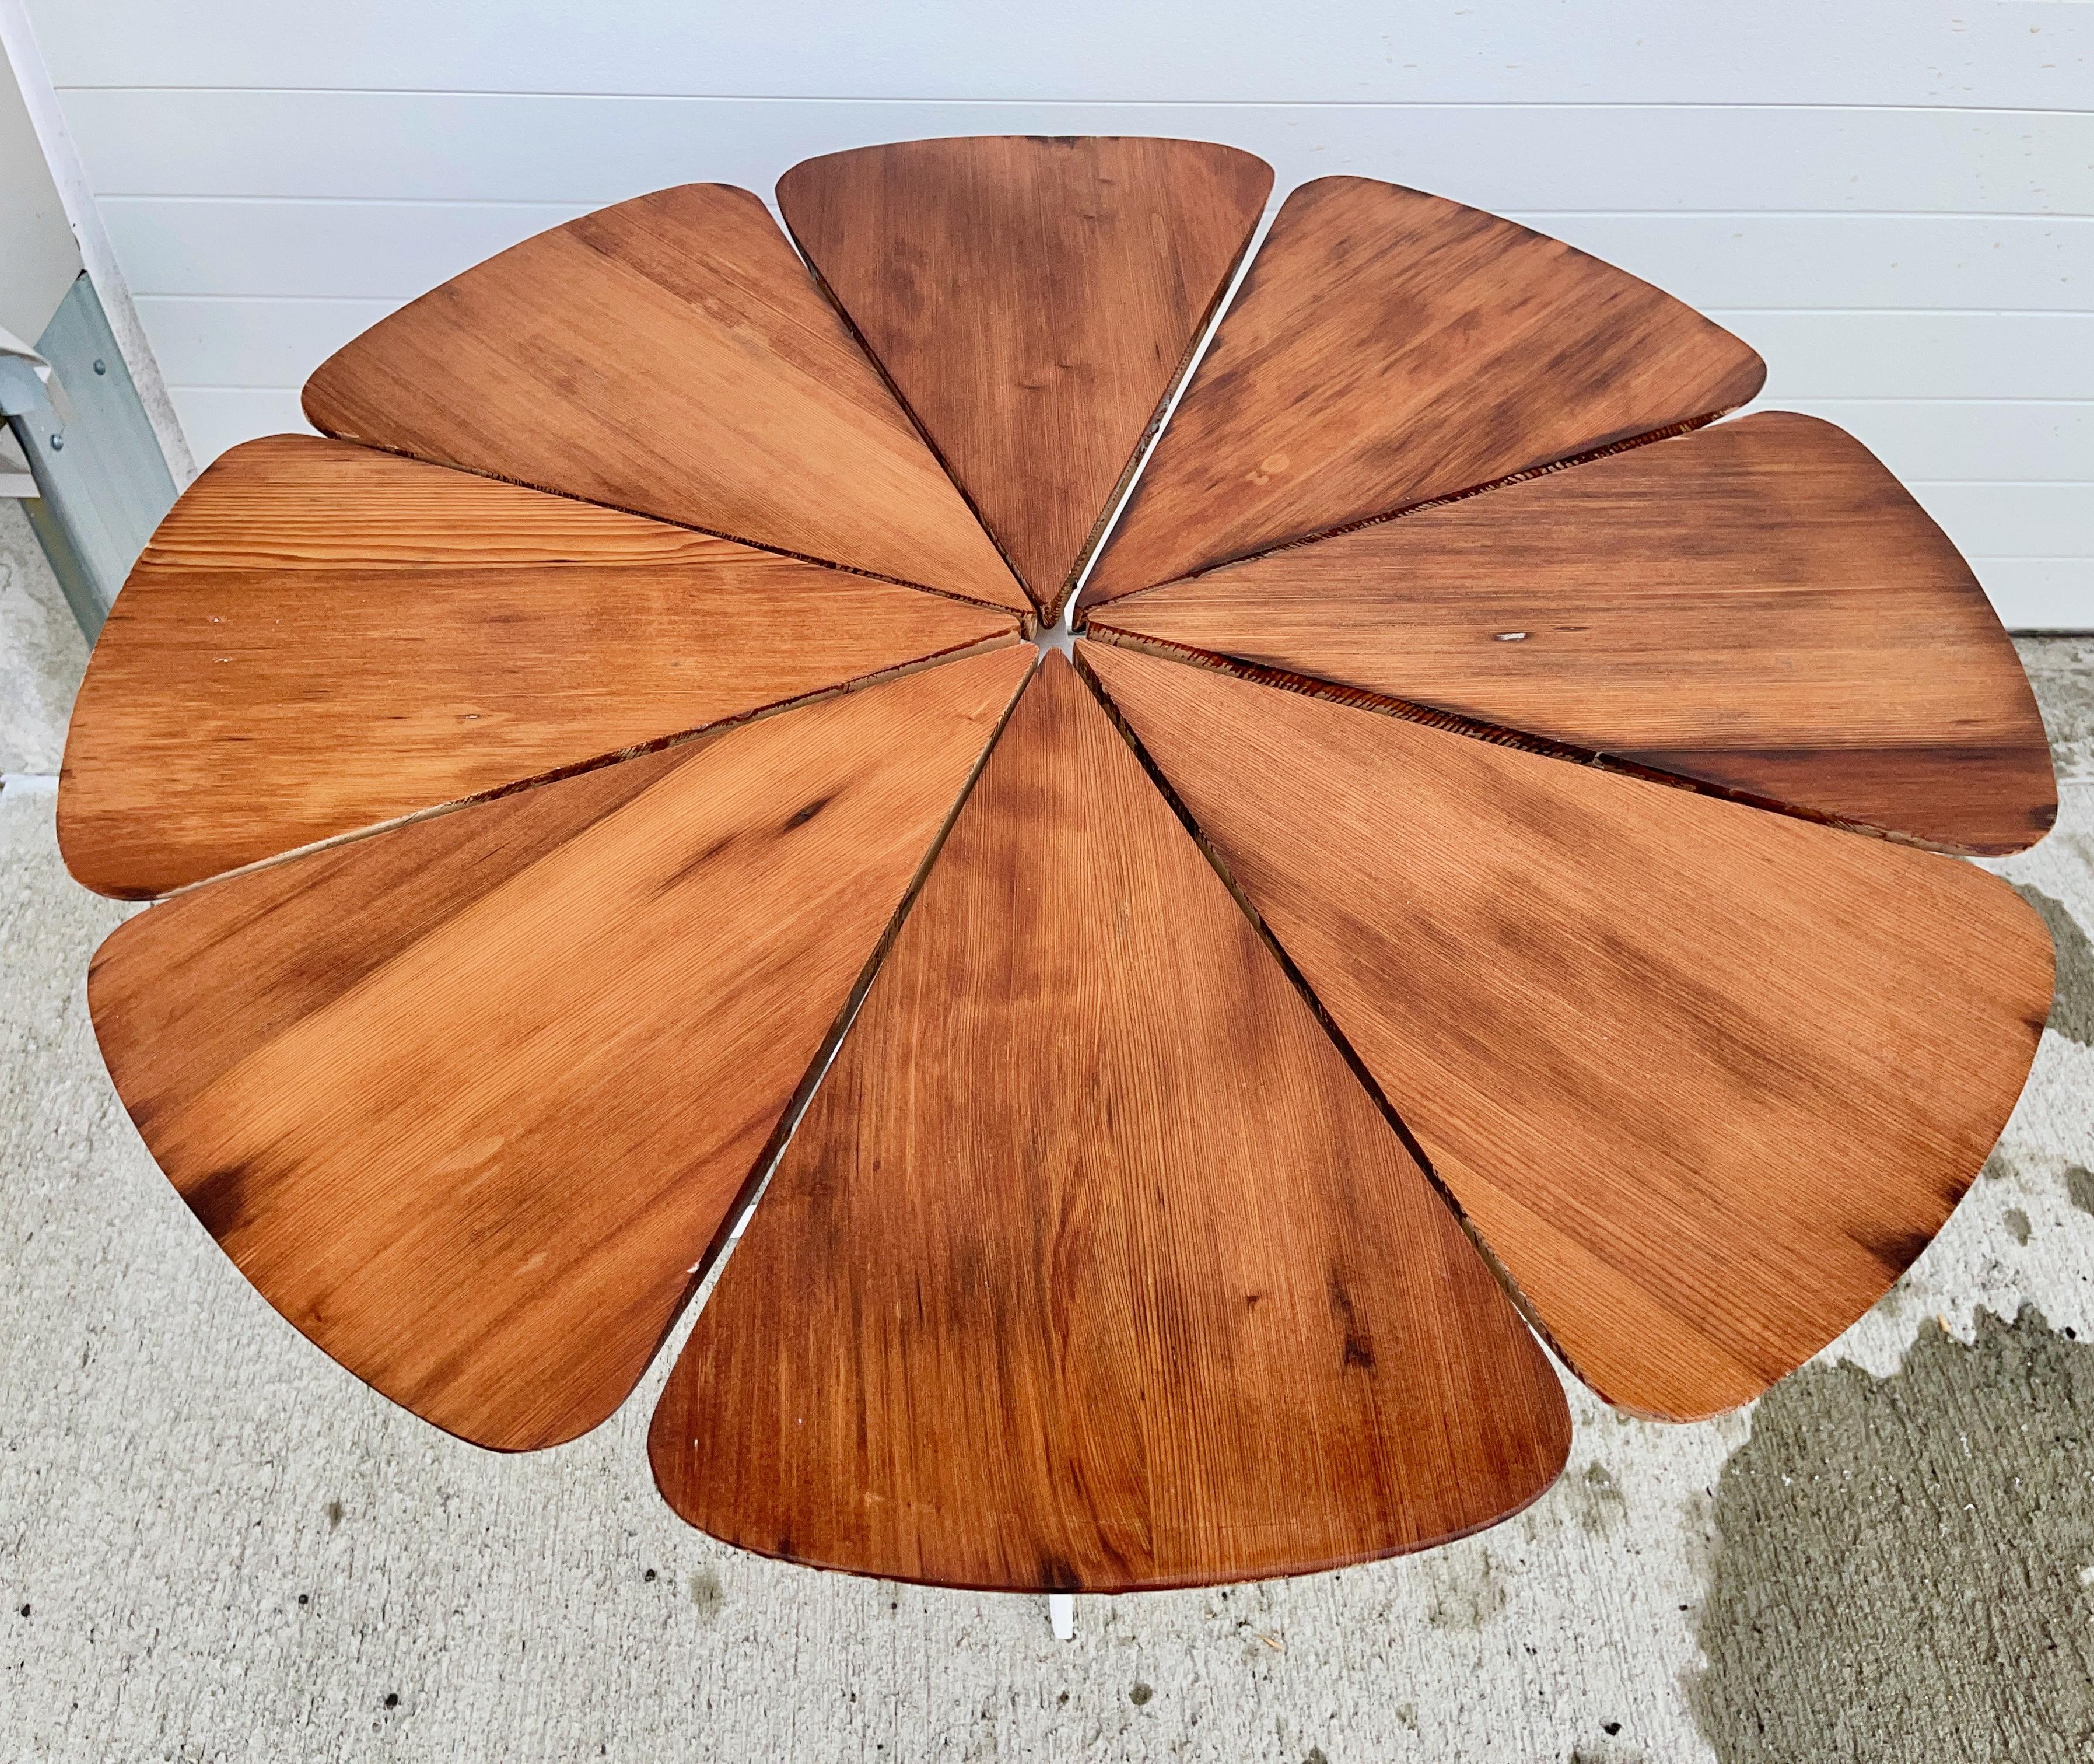 1961 Petal Dining Table by Richard Schultz for Knoll in California Redwood For Sale 5